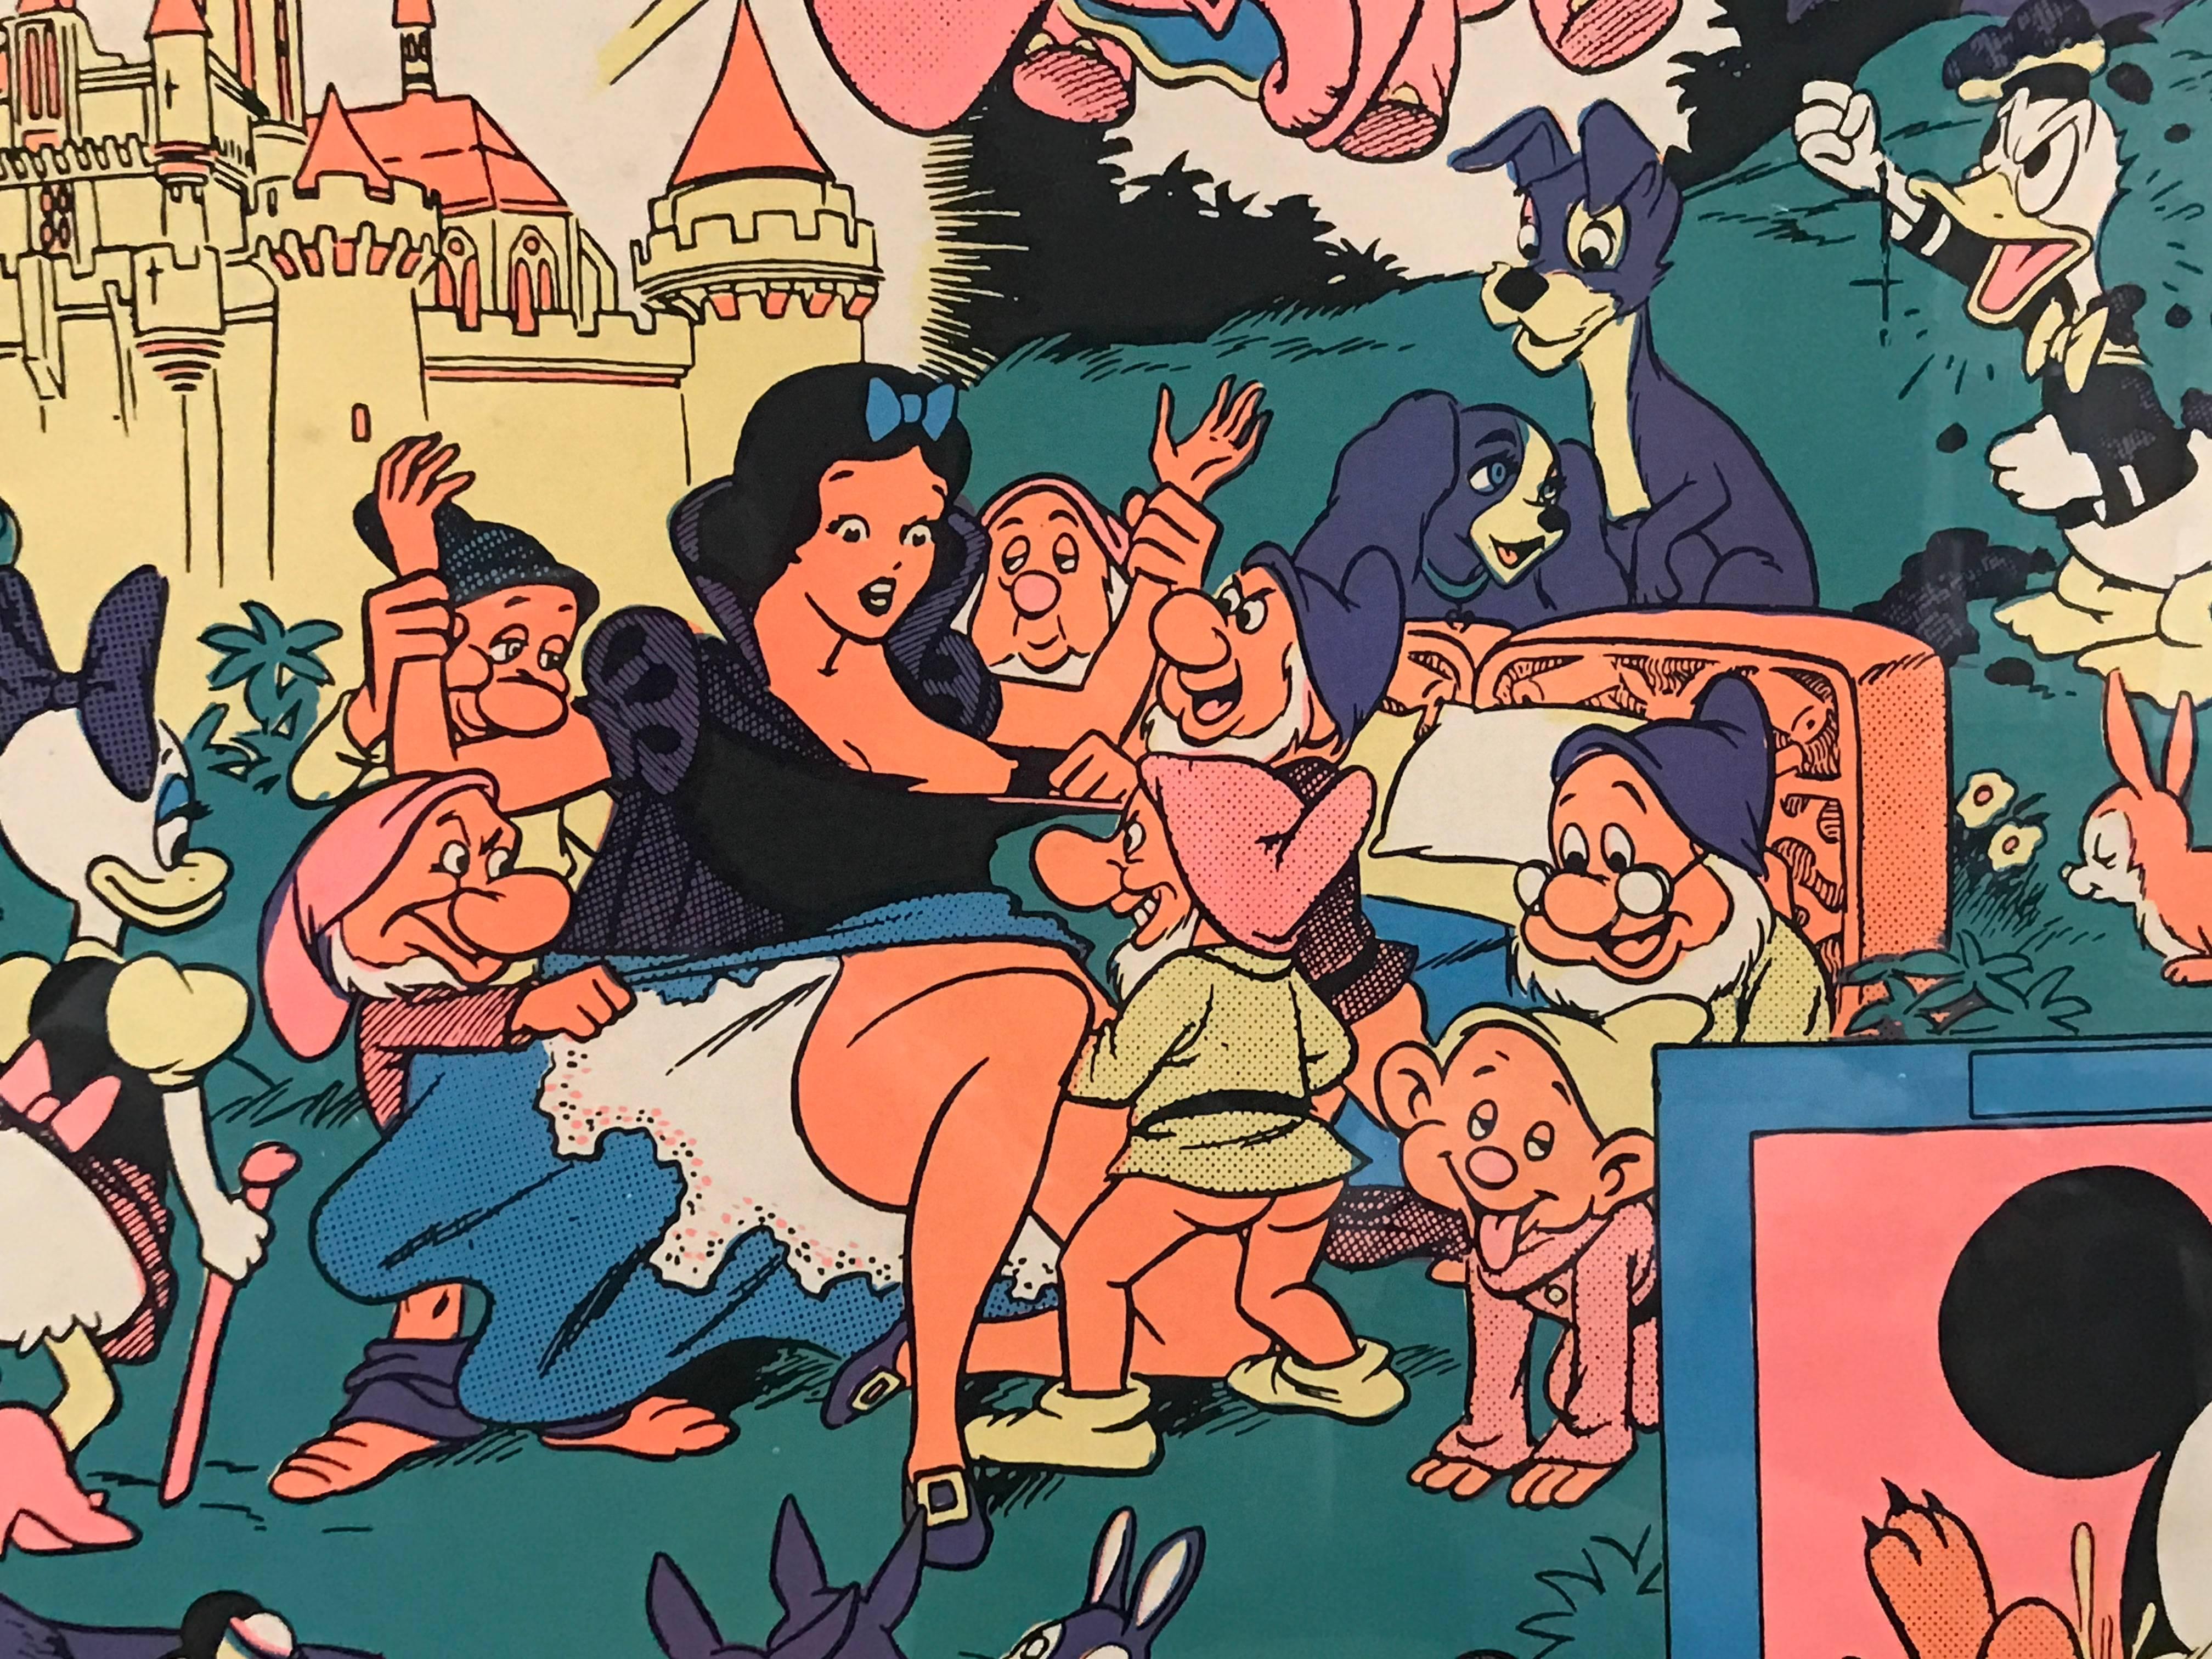 Disneyland Memorial Orgy poster, illustrated by Wally Wood, was a highlight of the satirical, underground magazine 